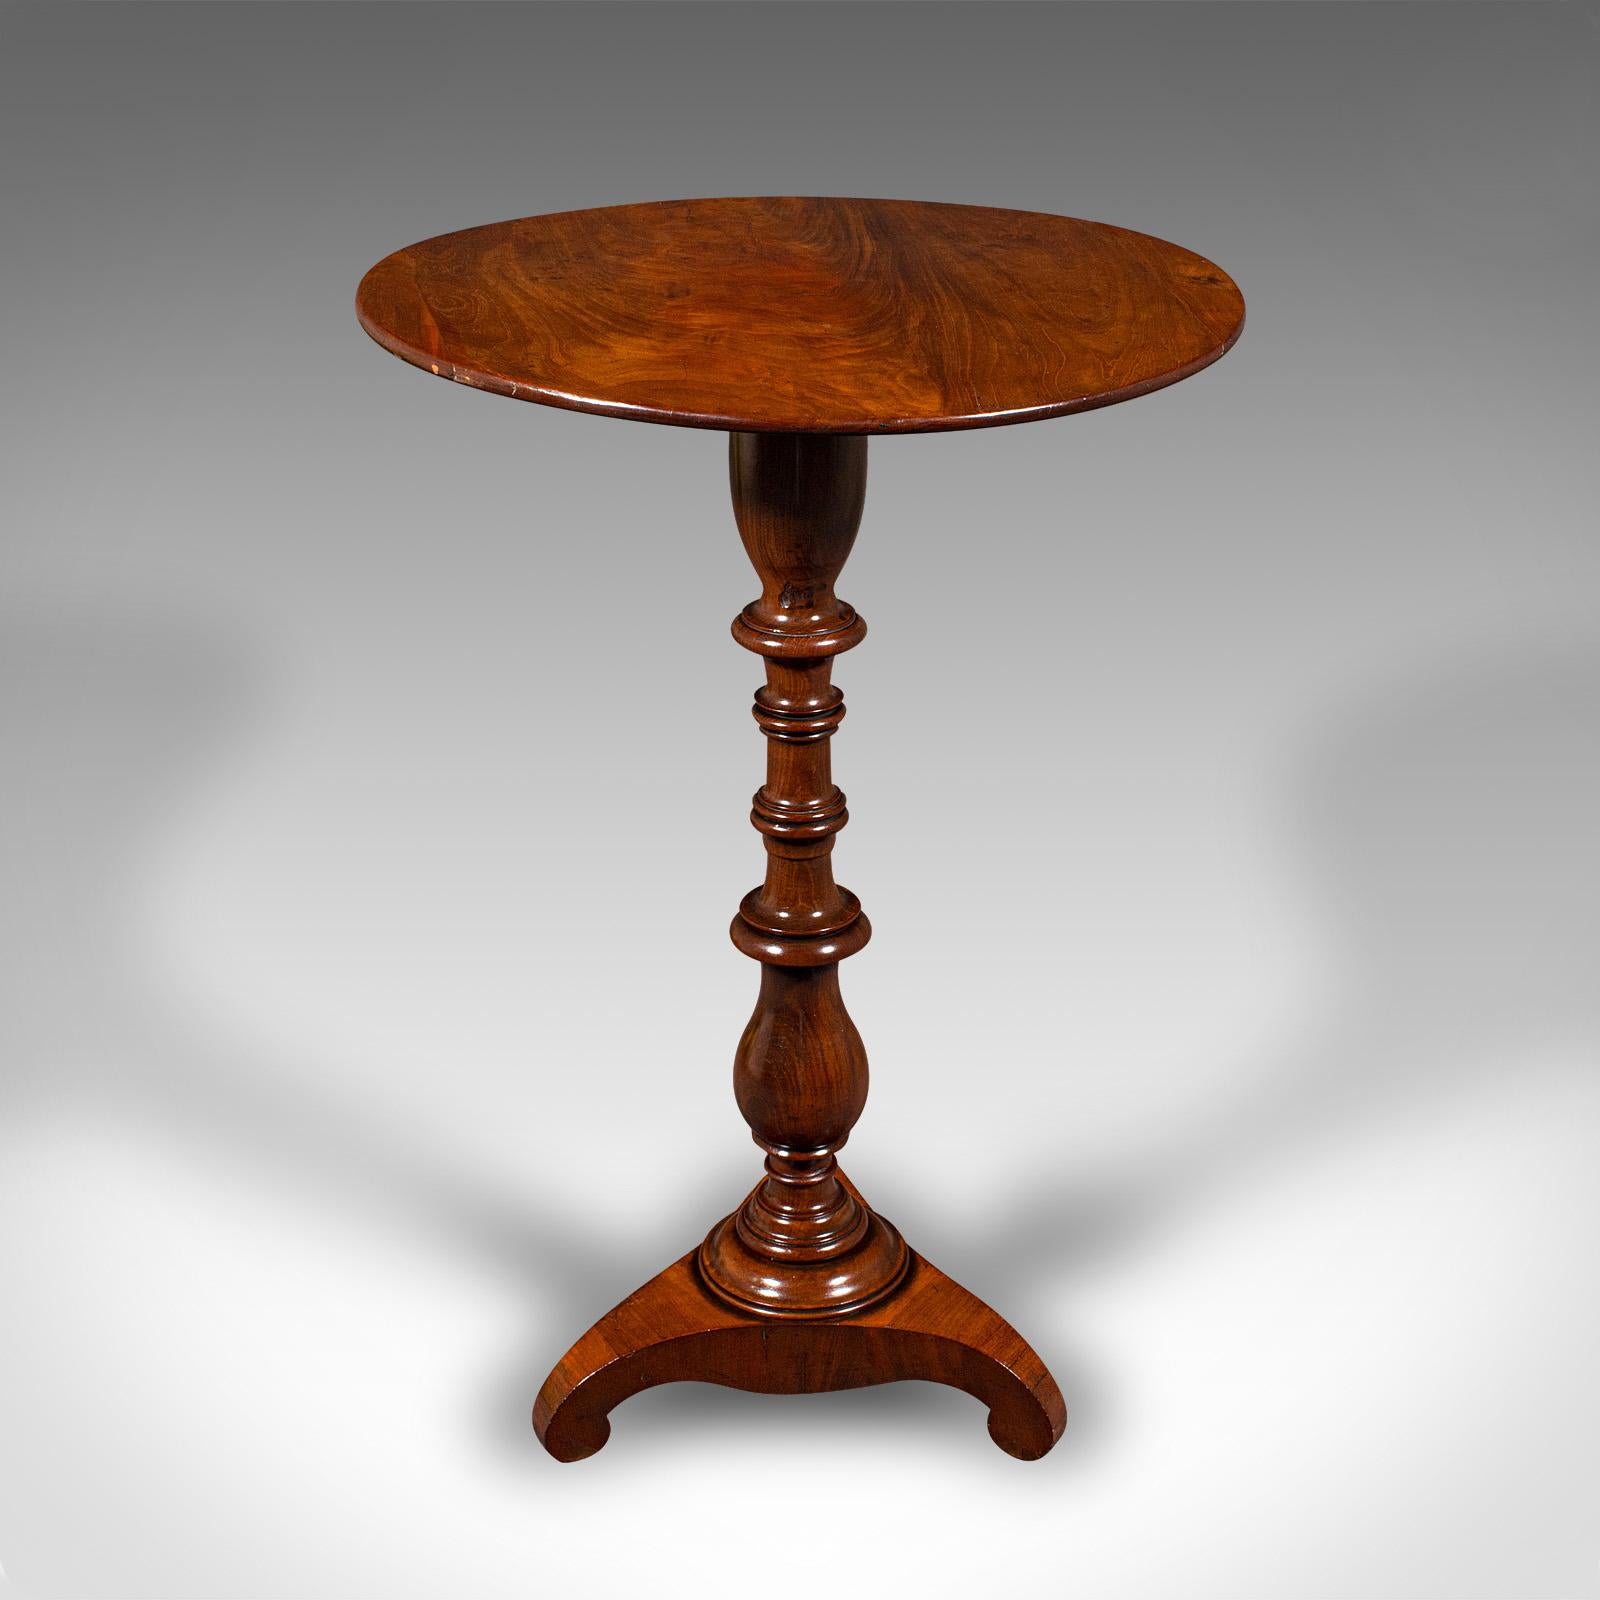 This is a small antique lamp table. An English, flame mahogany wine tripod table, dating to the Regency period, circa 1820.

Charmingly petite table with fine figuring and colour
Displays a desirable aged patina and in good order
Select flame stocks